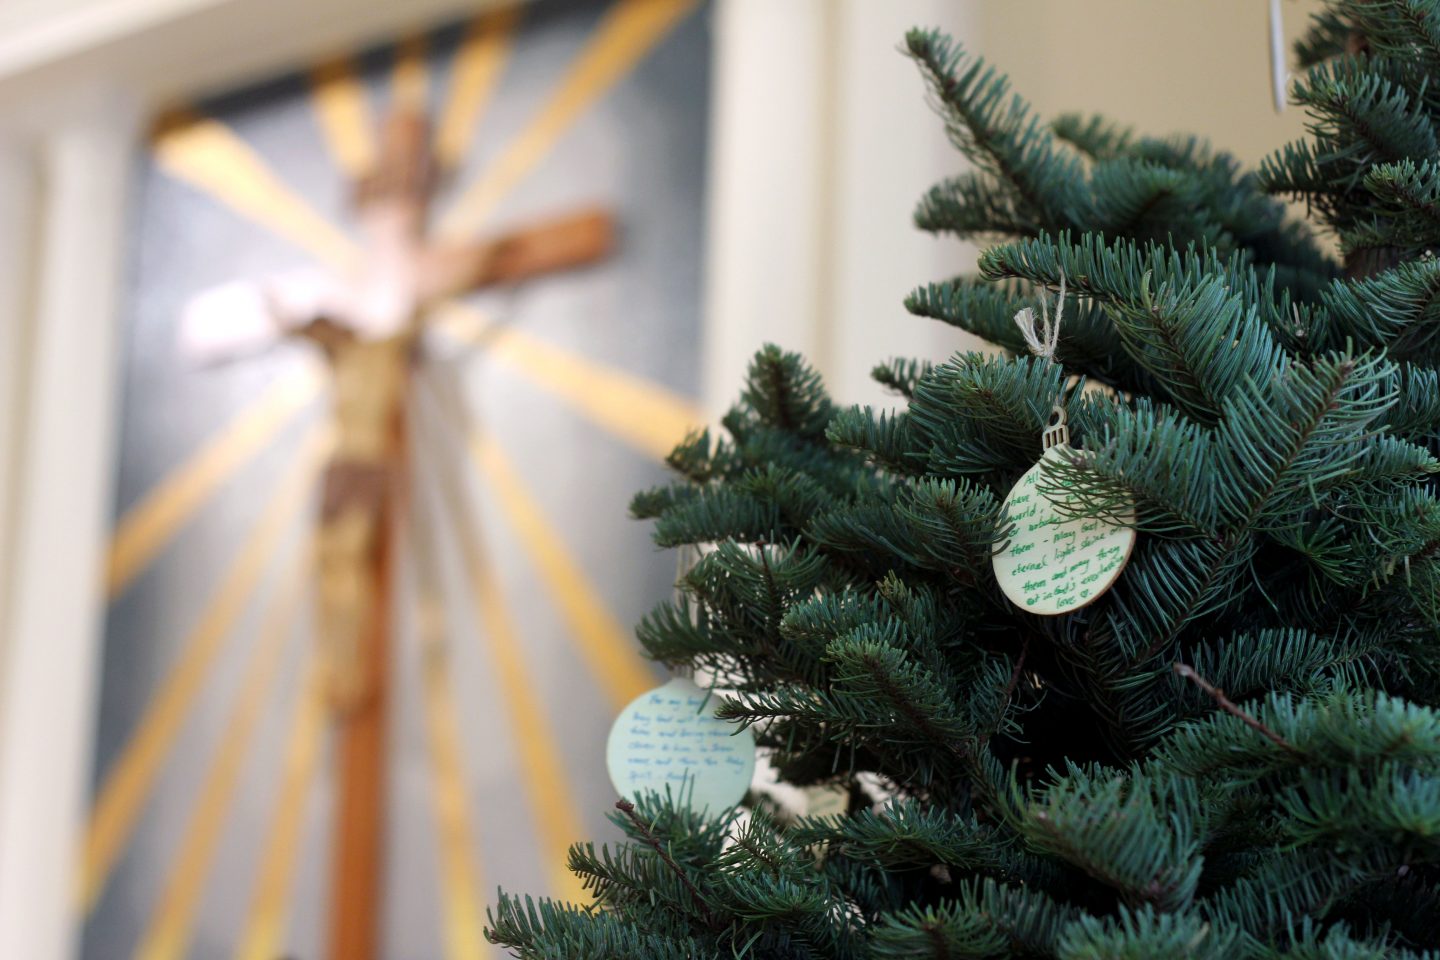 Those who submitted Advent prayer intentions online will have their petitions hung on the Christmas trees in front of the church.   